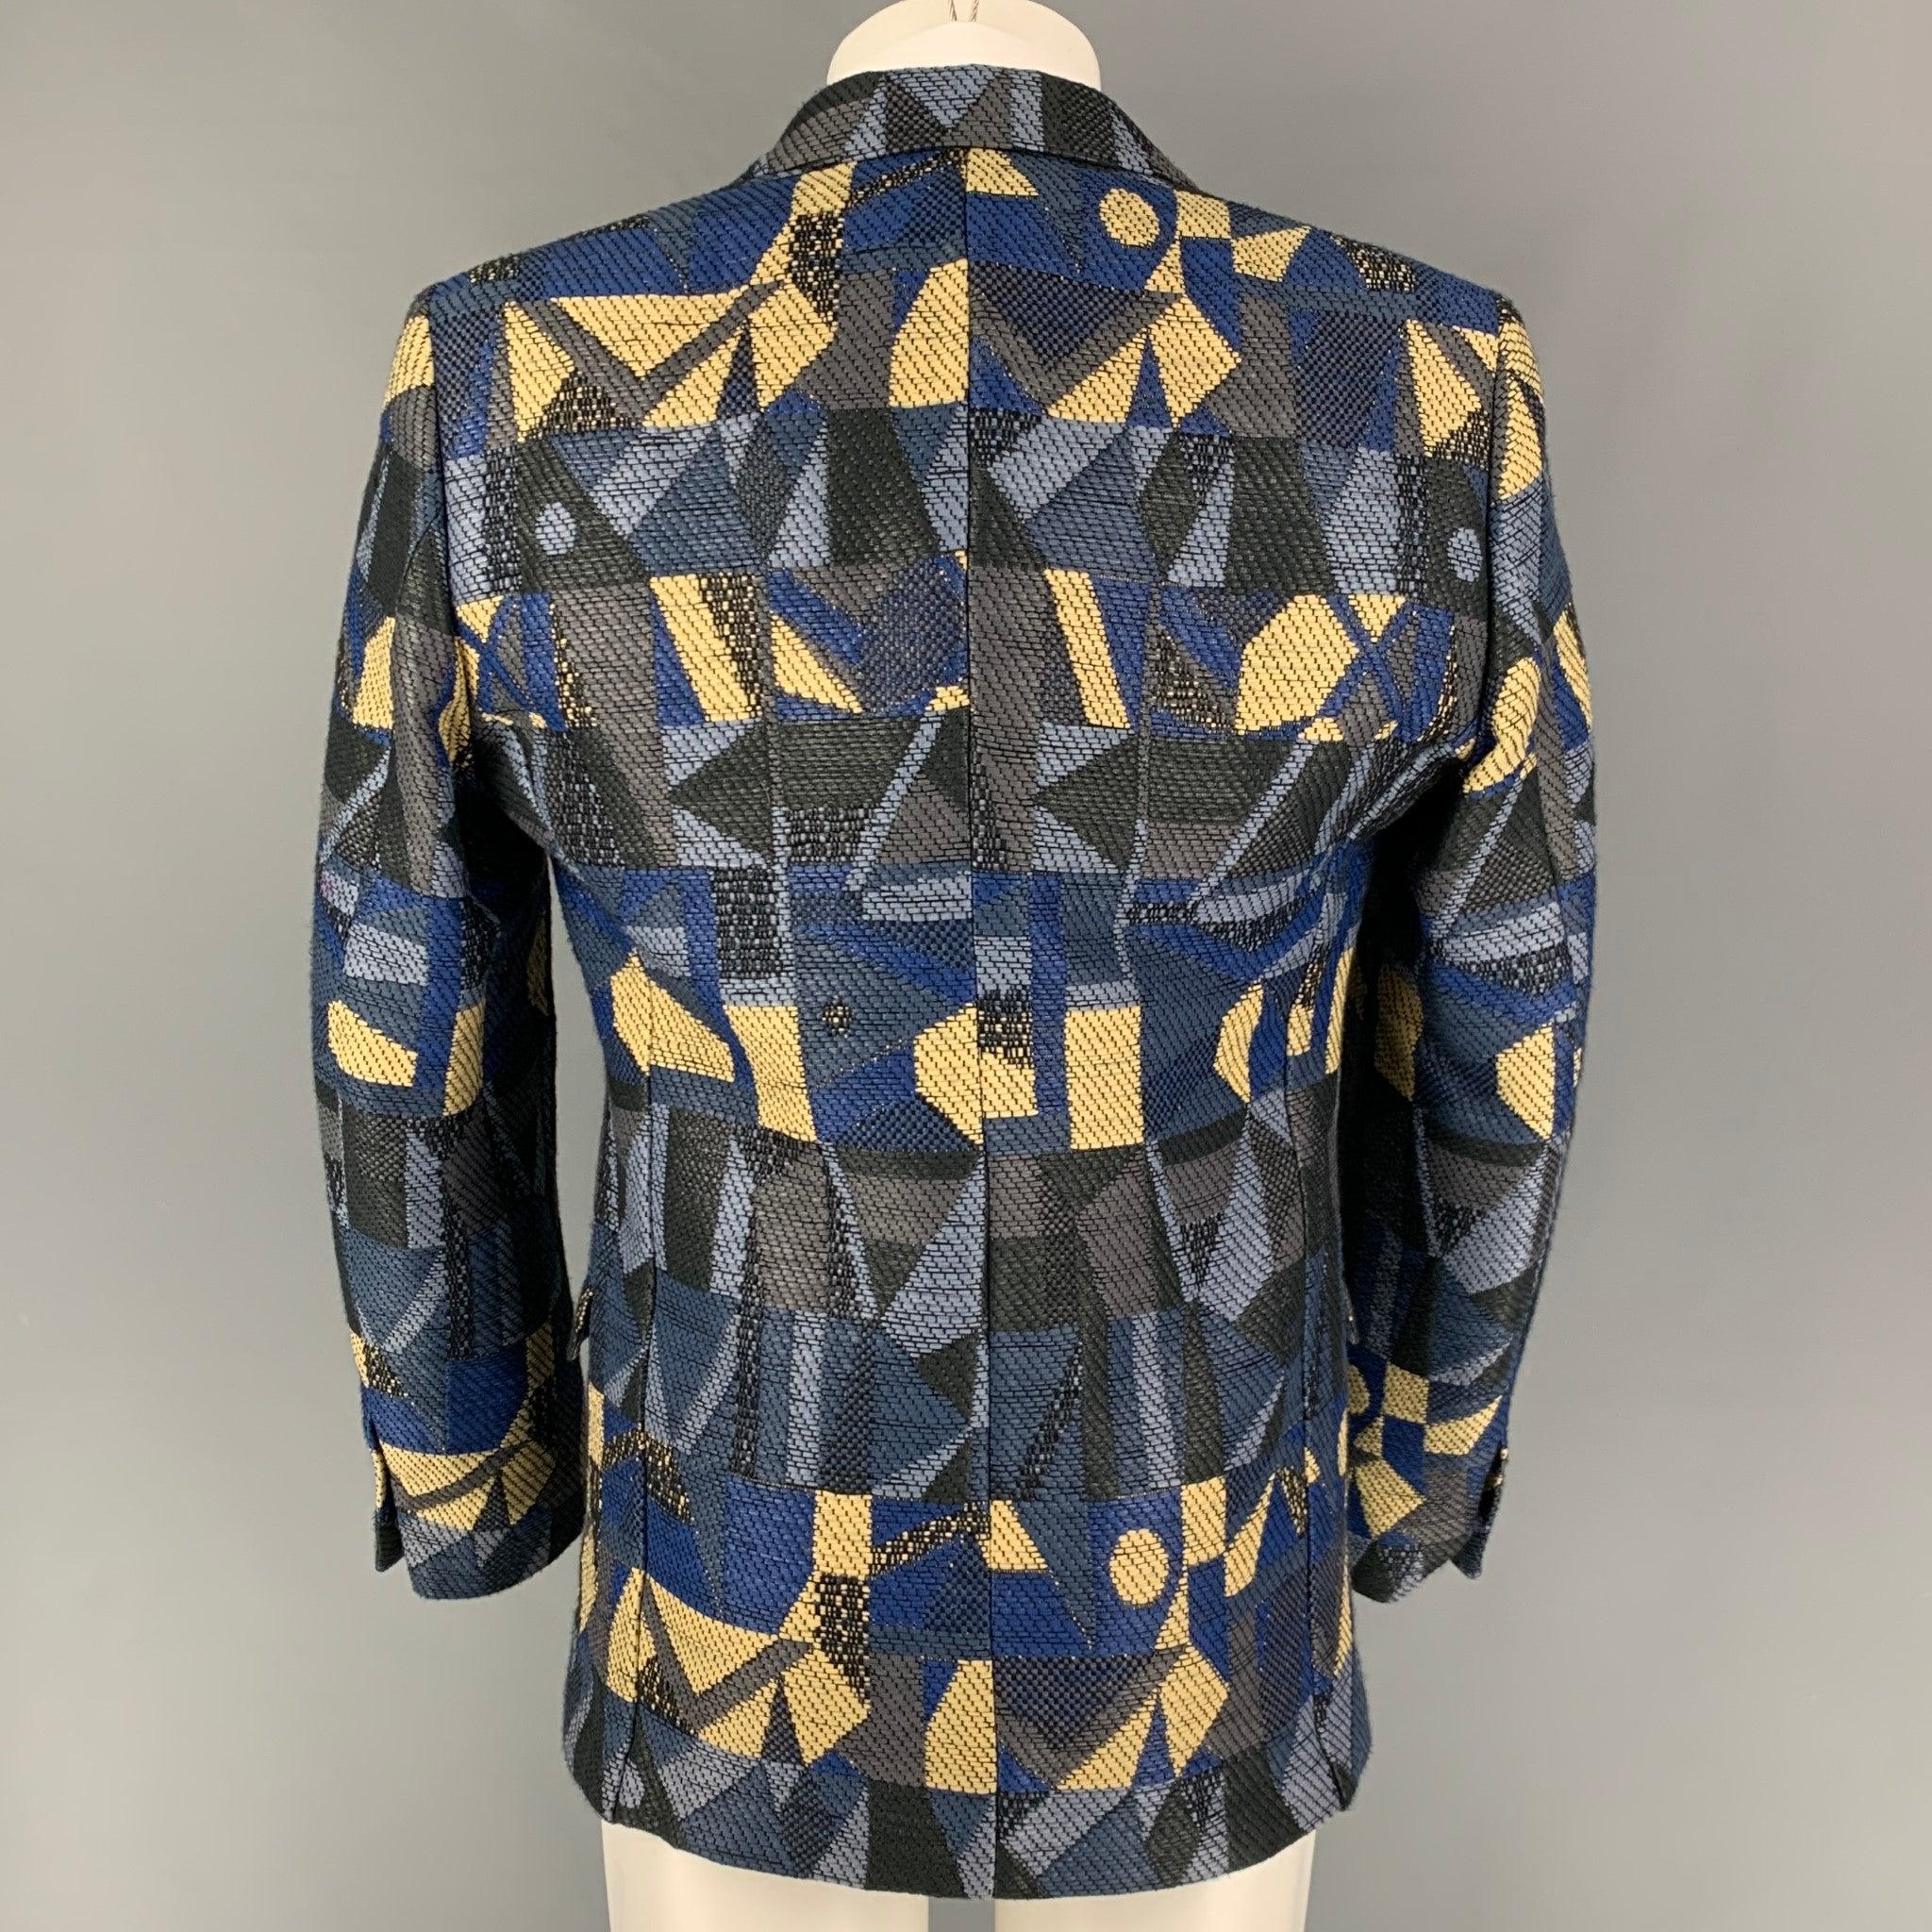 WALTER VAN BEIRENDONCK SS 14 Size 42 Grey Multi-Color Woven Sport Coat In Good Condition For Sale In San Francisco, CA